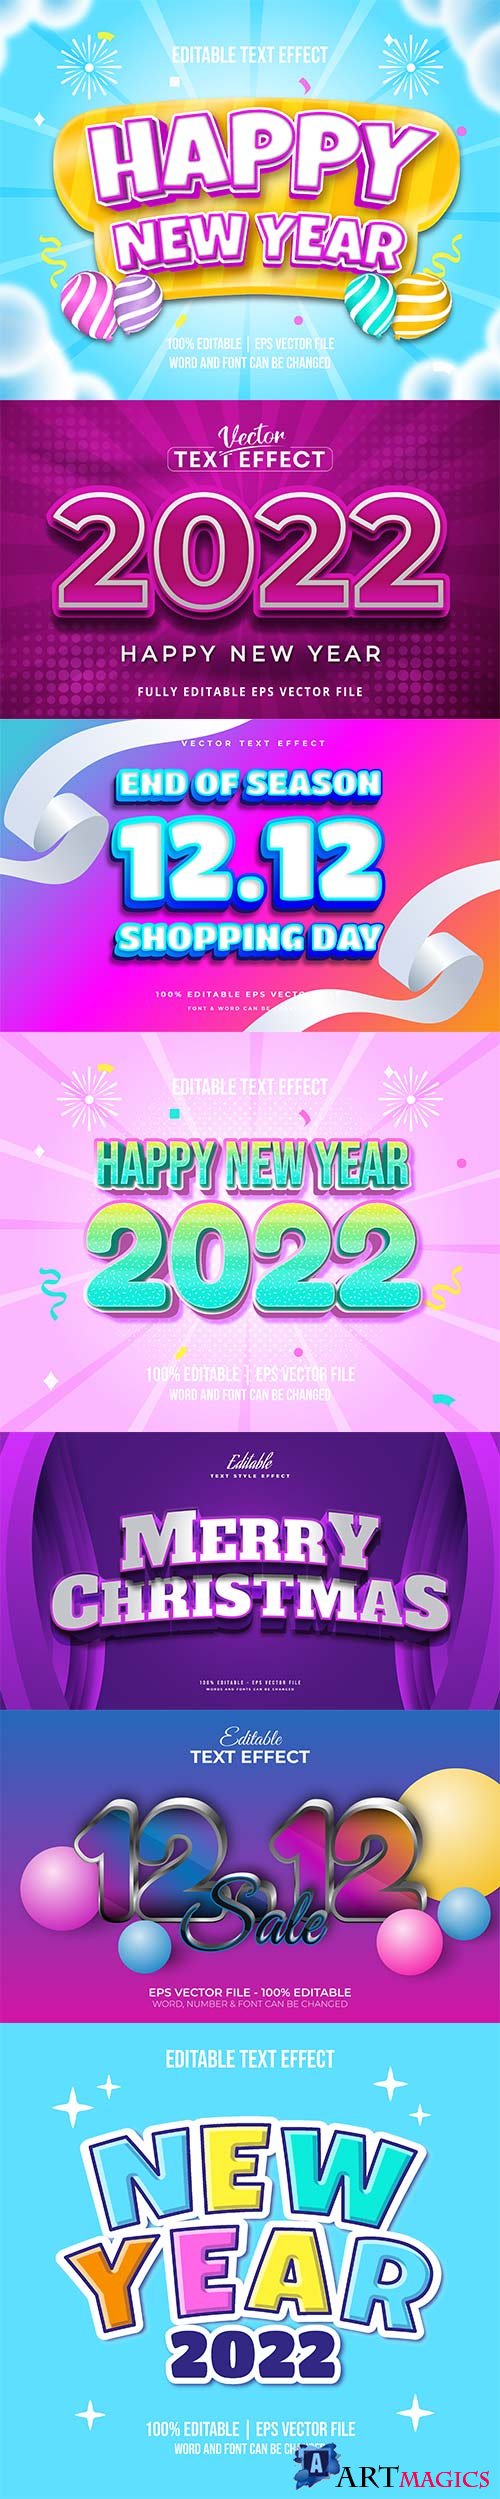 2022 New year and christmas editable text effect vector vol 37